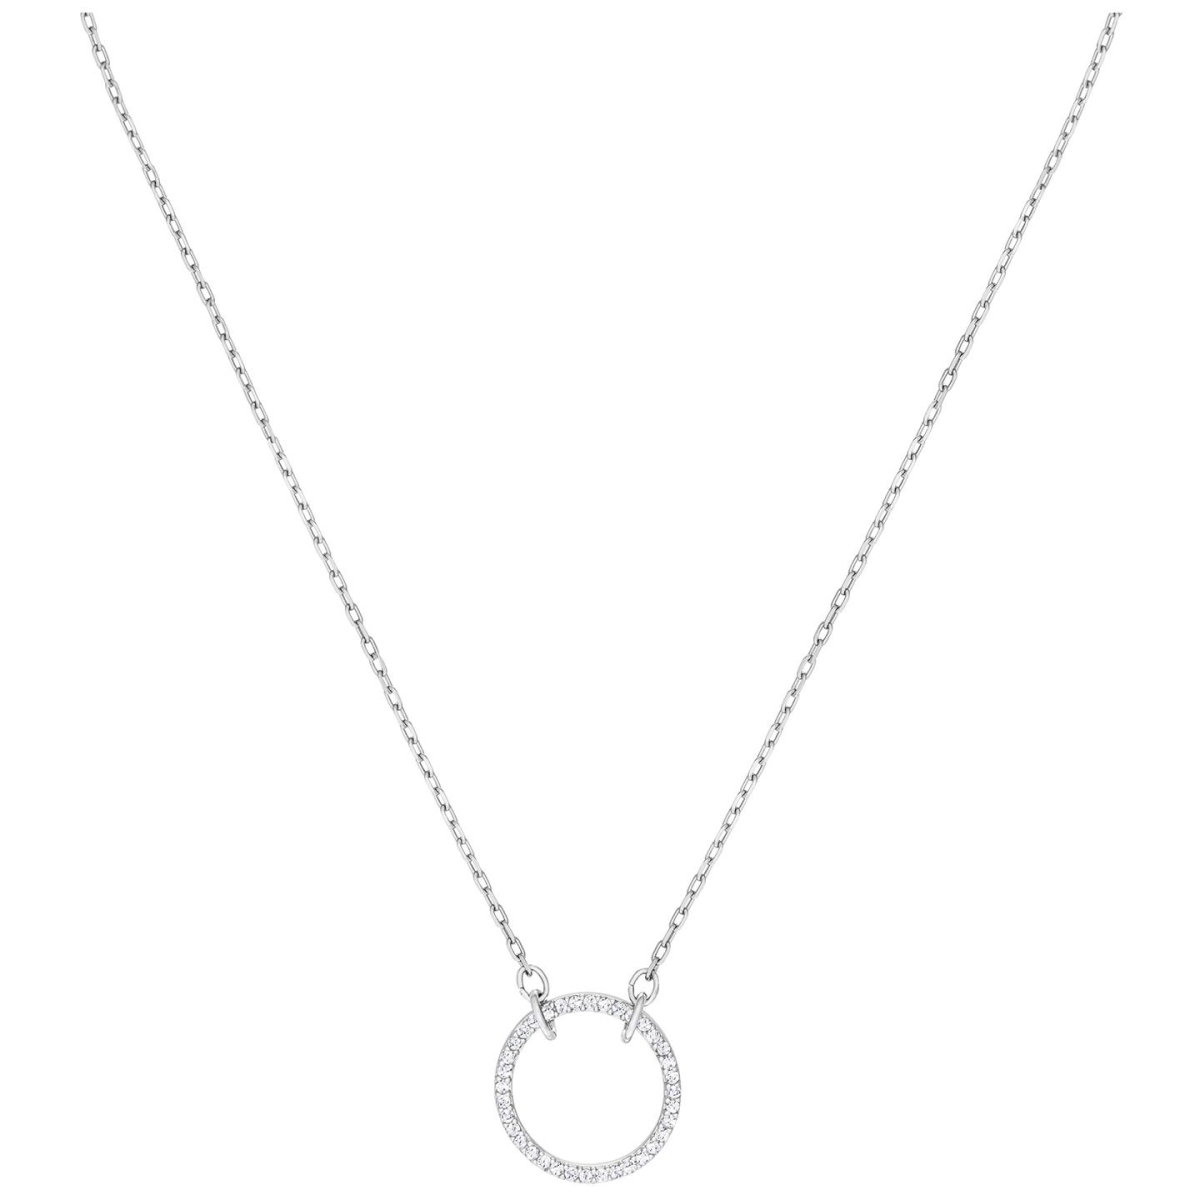 5465802 Only Rhodium Plating Necklace - White